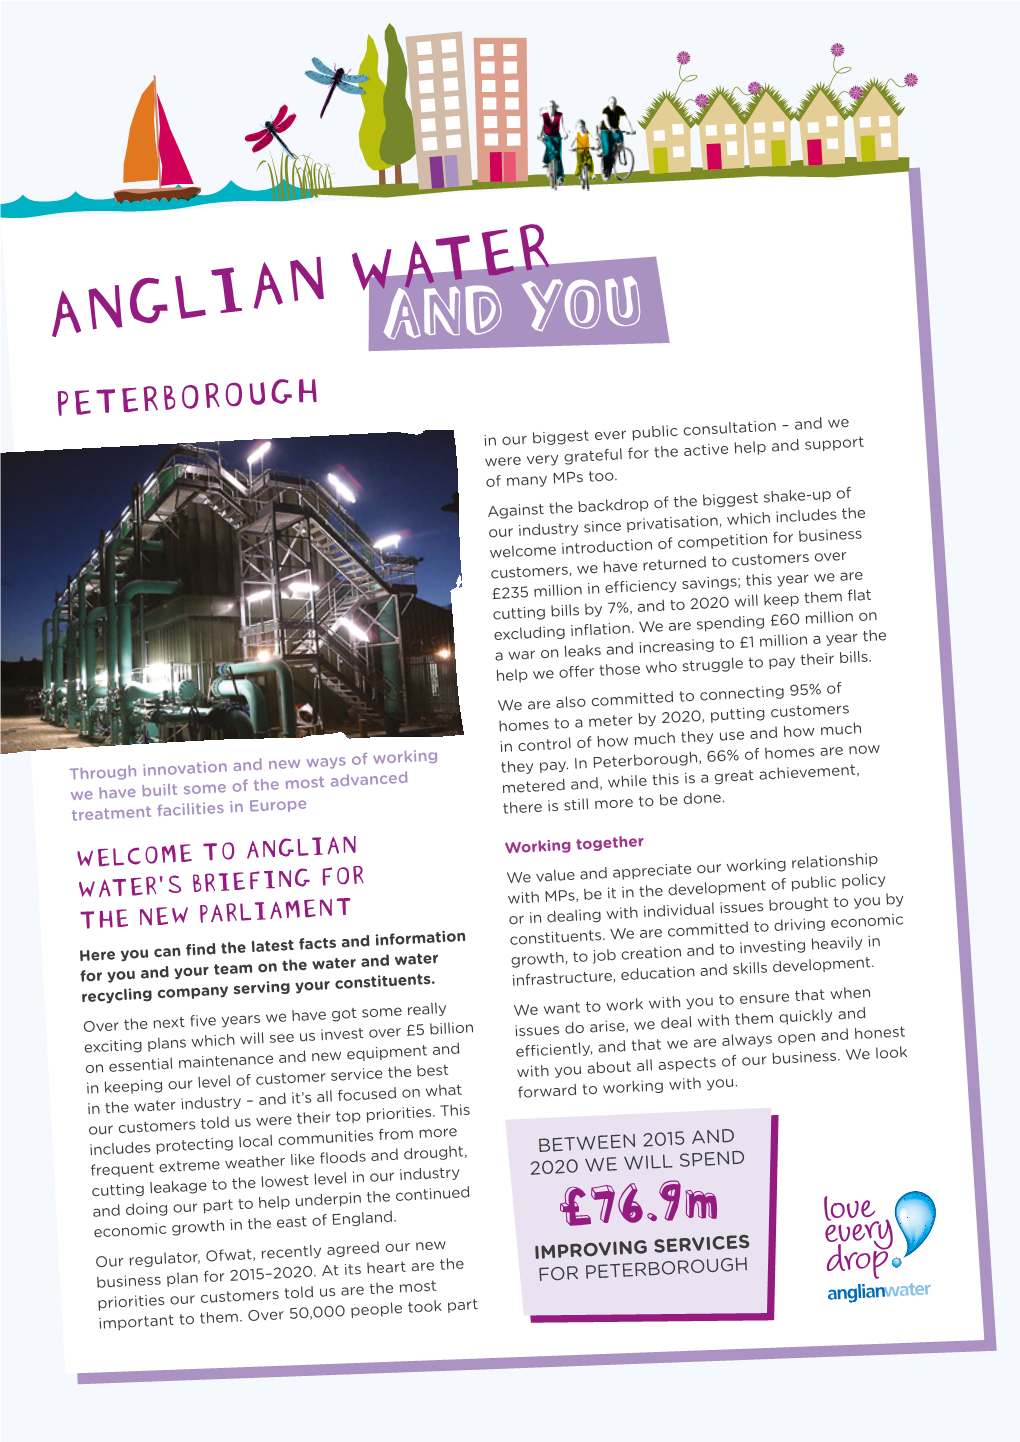 ANGLIAN WATERAND YOU PETERBOROUGH in Our Biggest Ever Public Consultation – and We Were Very Grateful for the Active Help and Support of Many Mps Too